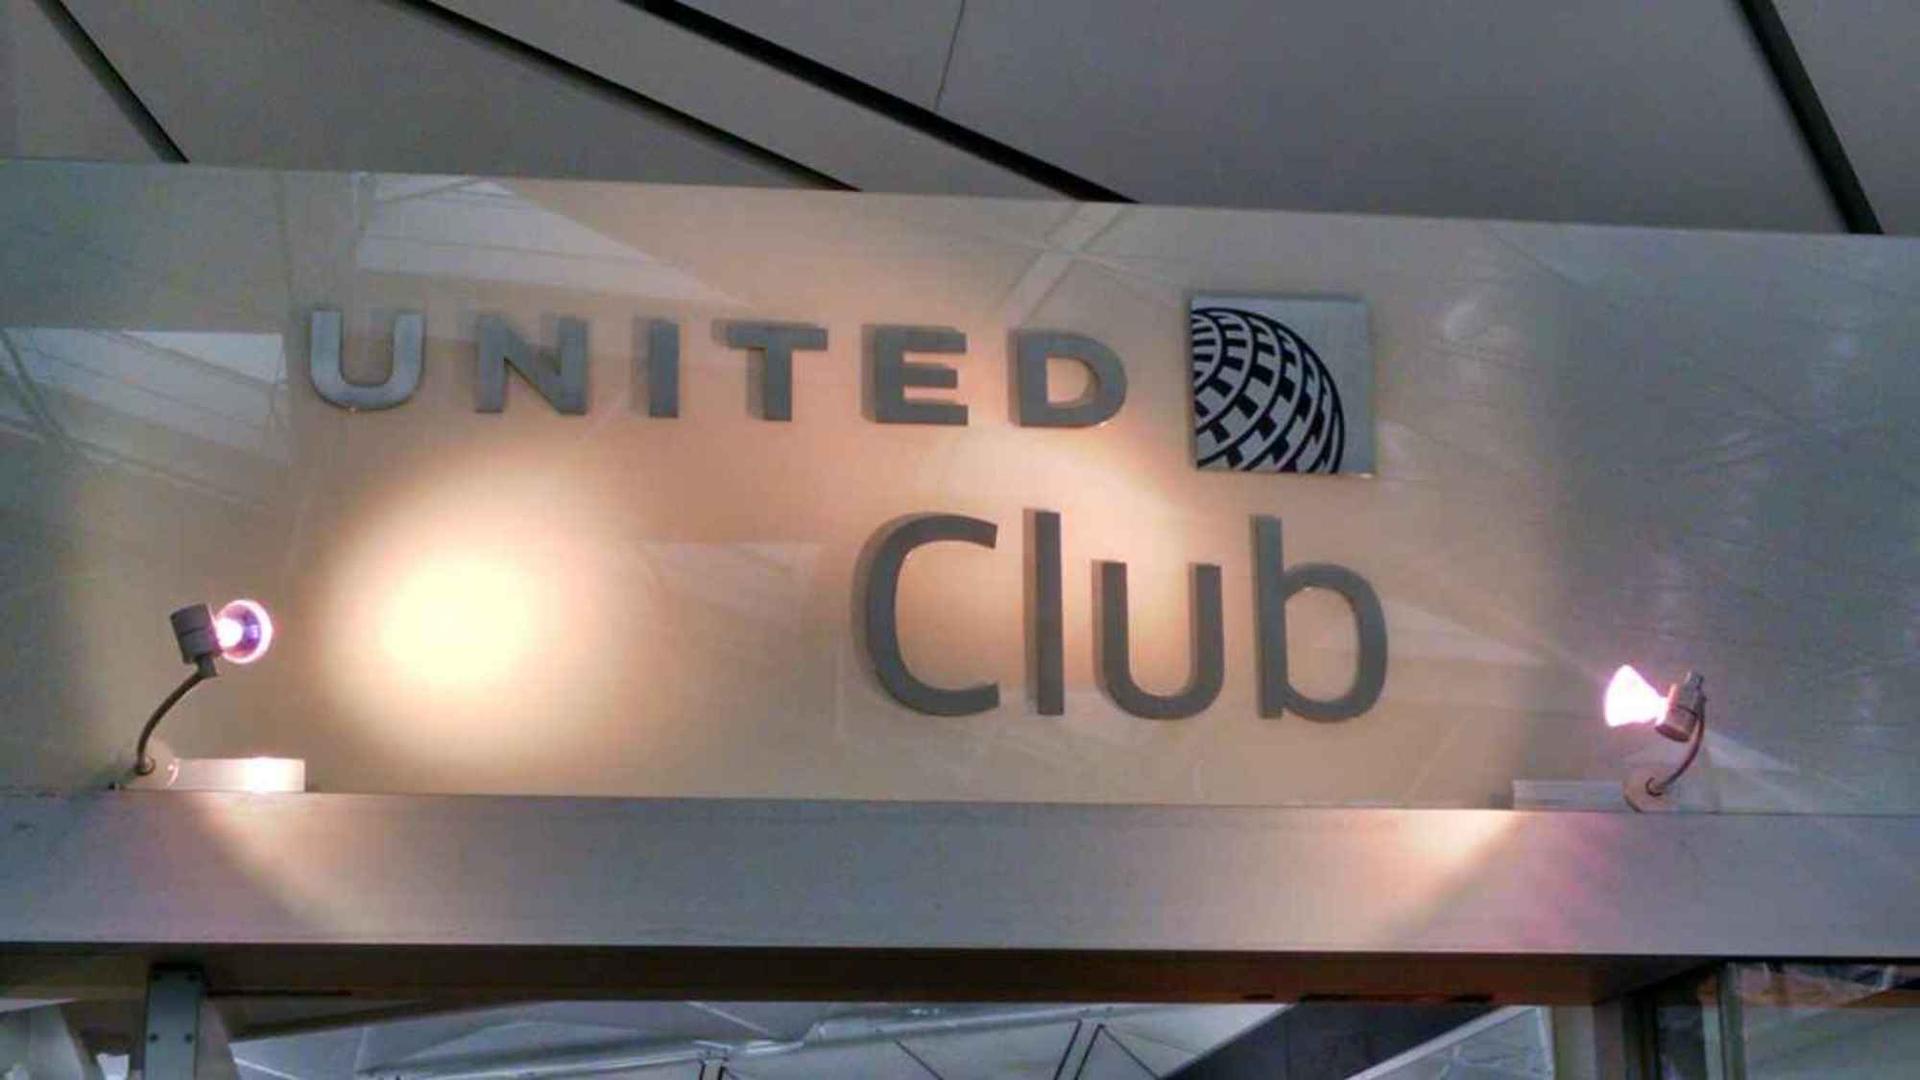 United Airlines United Club  image 8 of 28